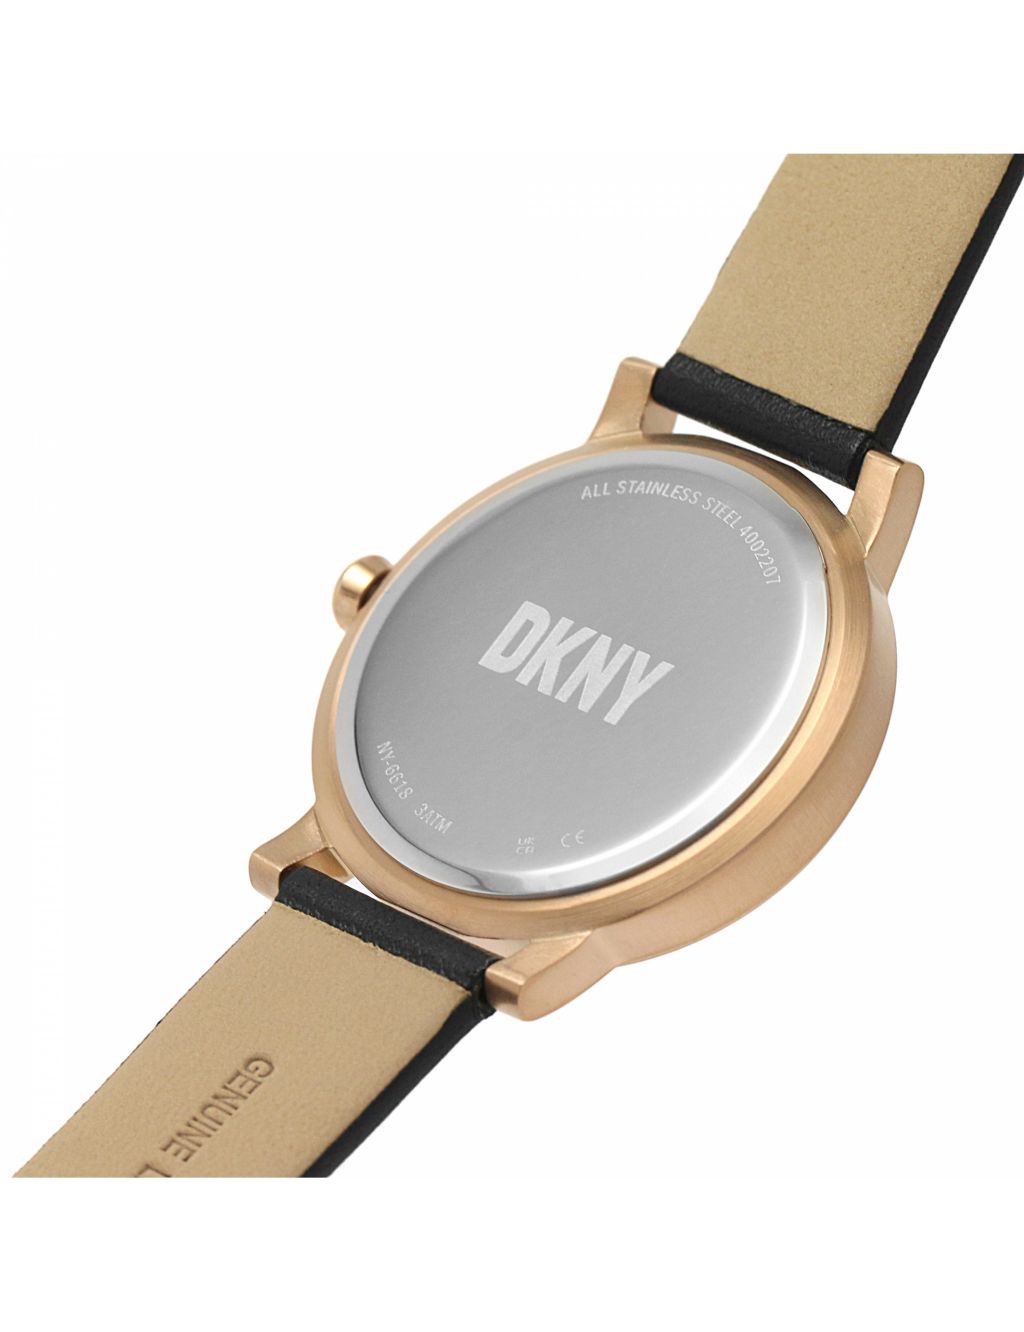 DKNY 7th Avenue Black Leather Watch image 3